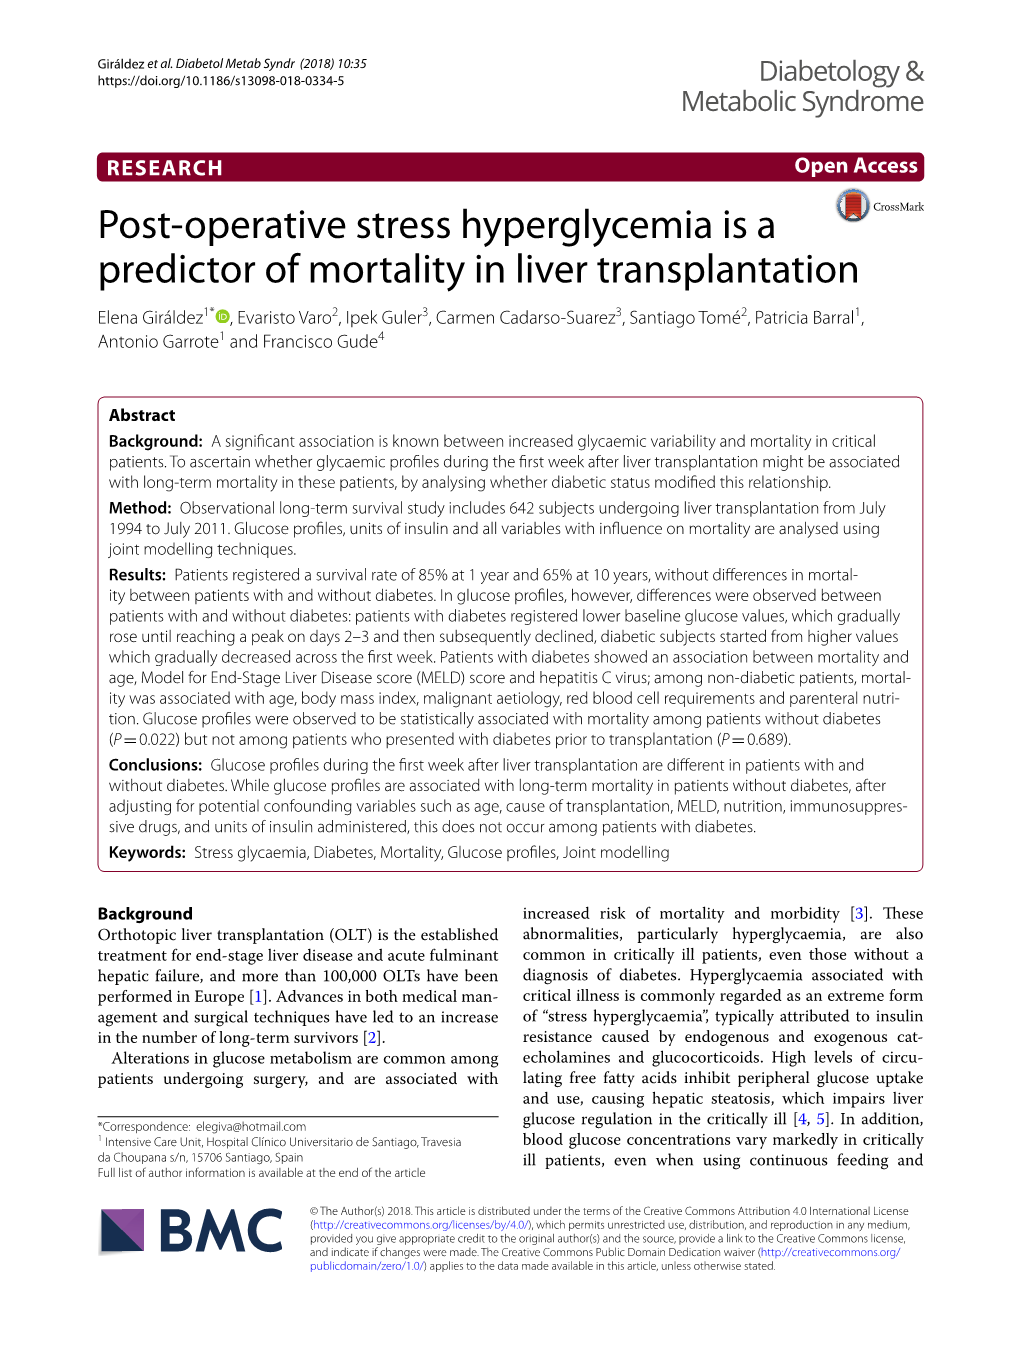 Post-Operative Stress Hyperglycemia Is a Predictor of Mortality in Liver